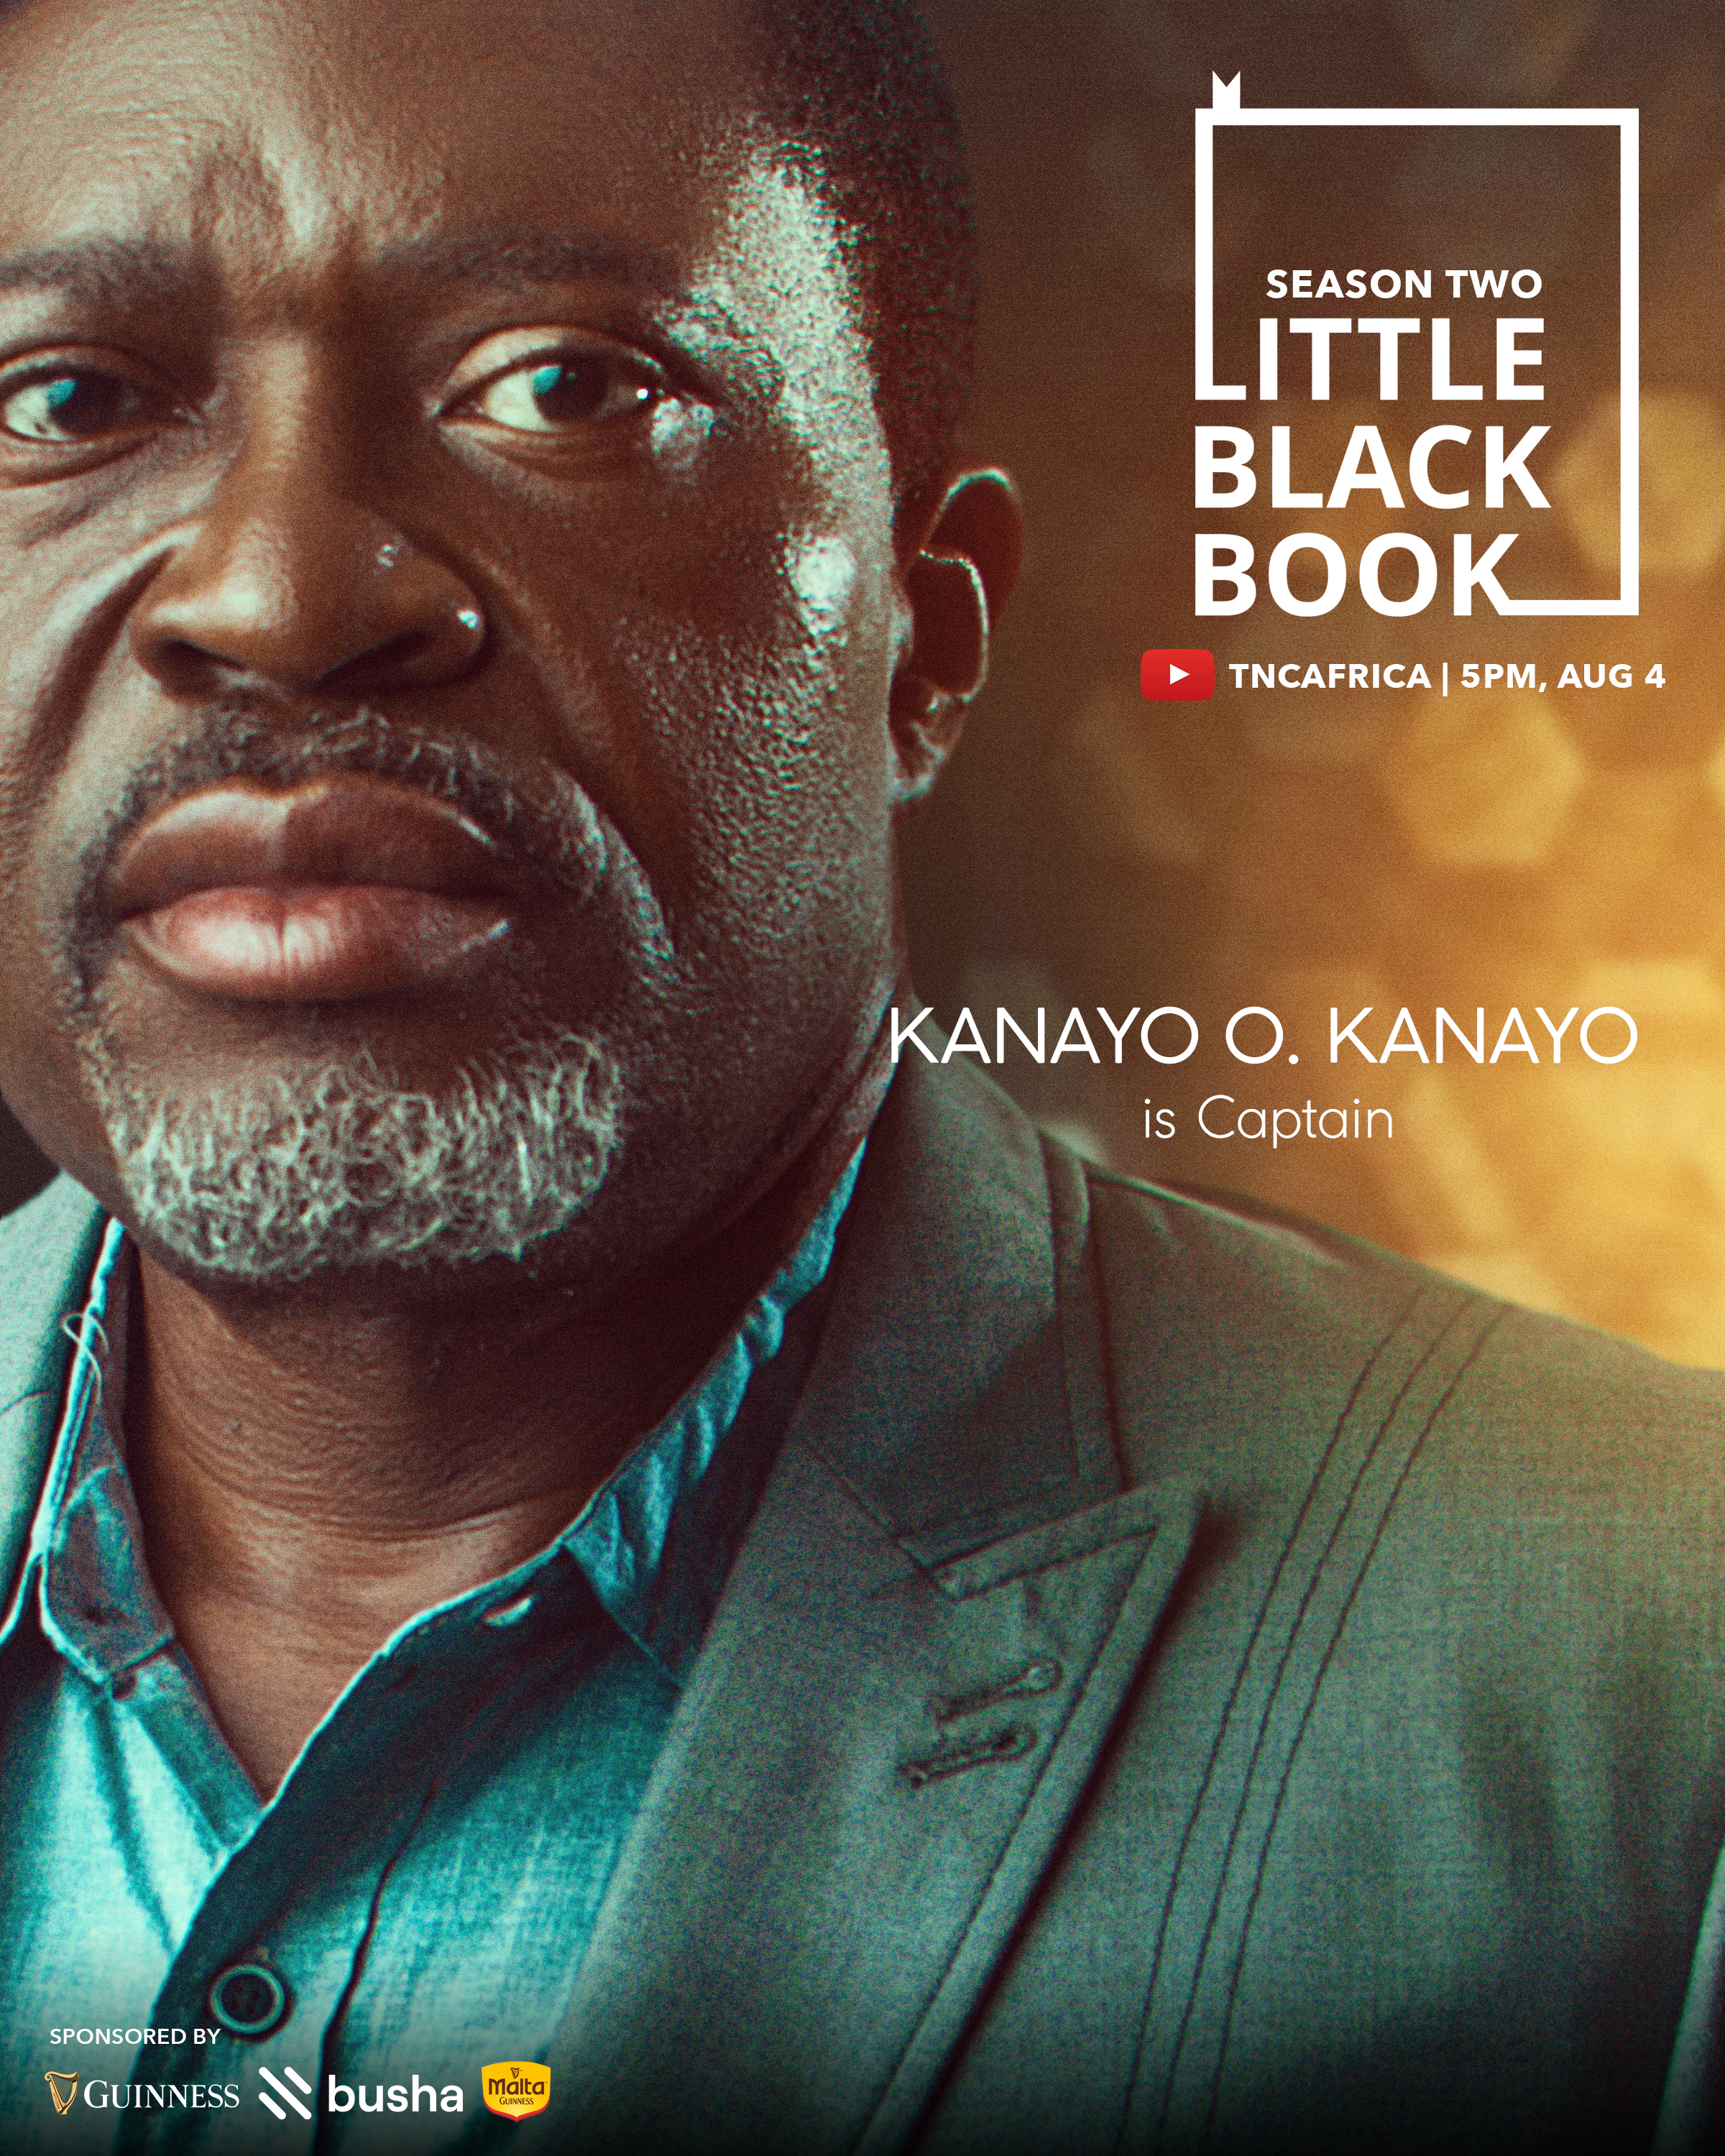 KOK - “Little Black Book” Returns This August 4th Unveils Character Posters Ahead of Trailer Debut